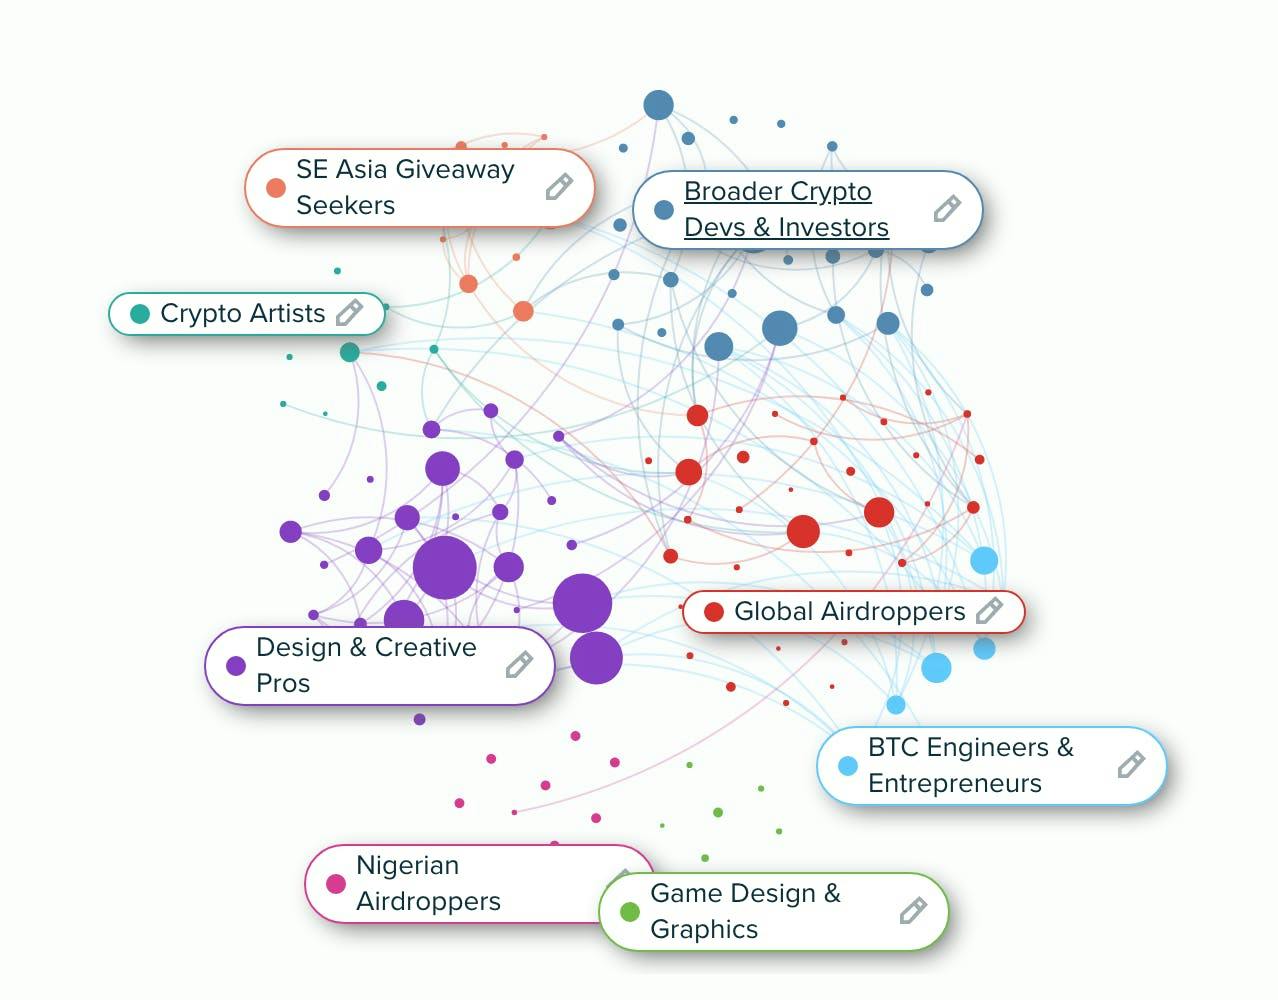 A graph from Meltwater's audience insight platform displaying the different groups of people that are engaging in the online conversation around NFTs: Crypto Artists, Design & Creative Pros, Global Airdroppers, etc.